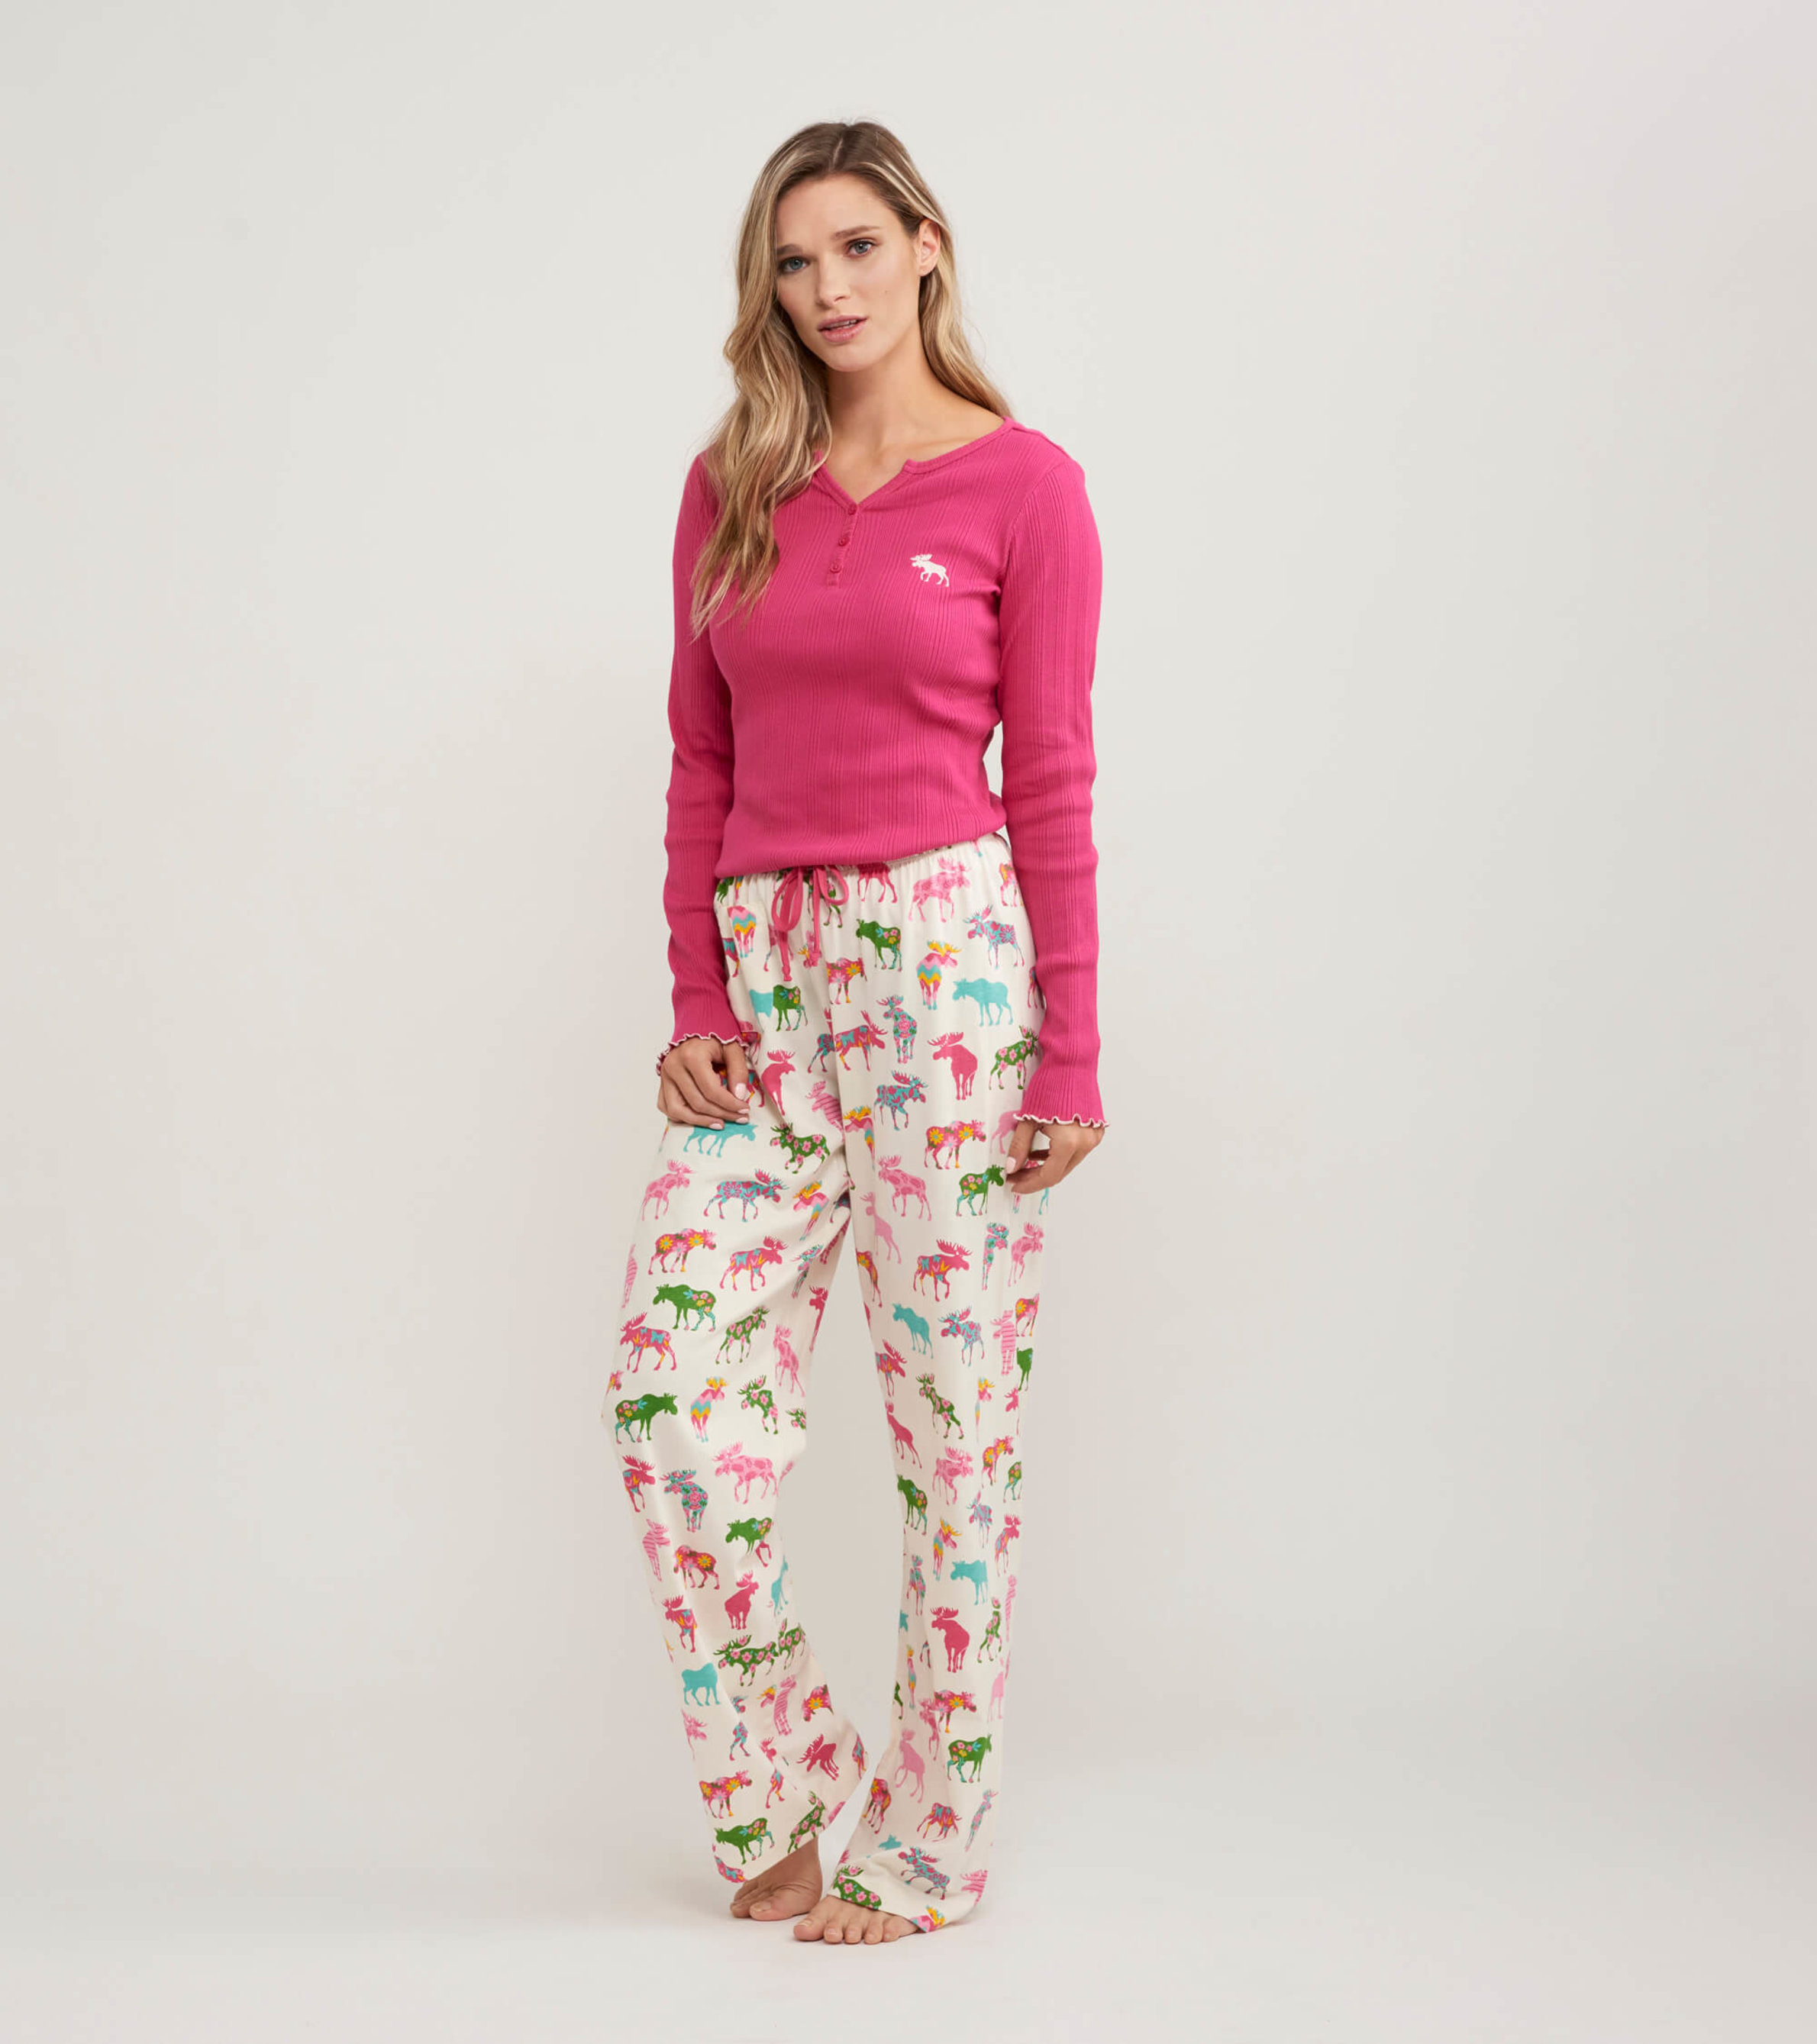 Patterned Moose Women's Tee and Pants Pajama Separates - Little